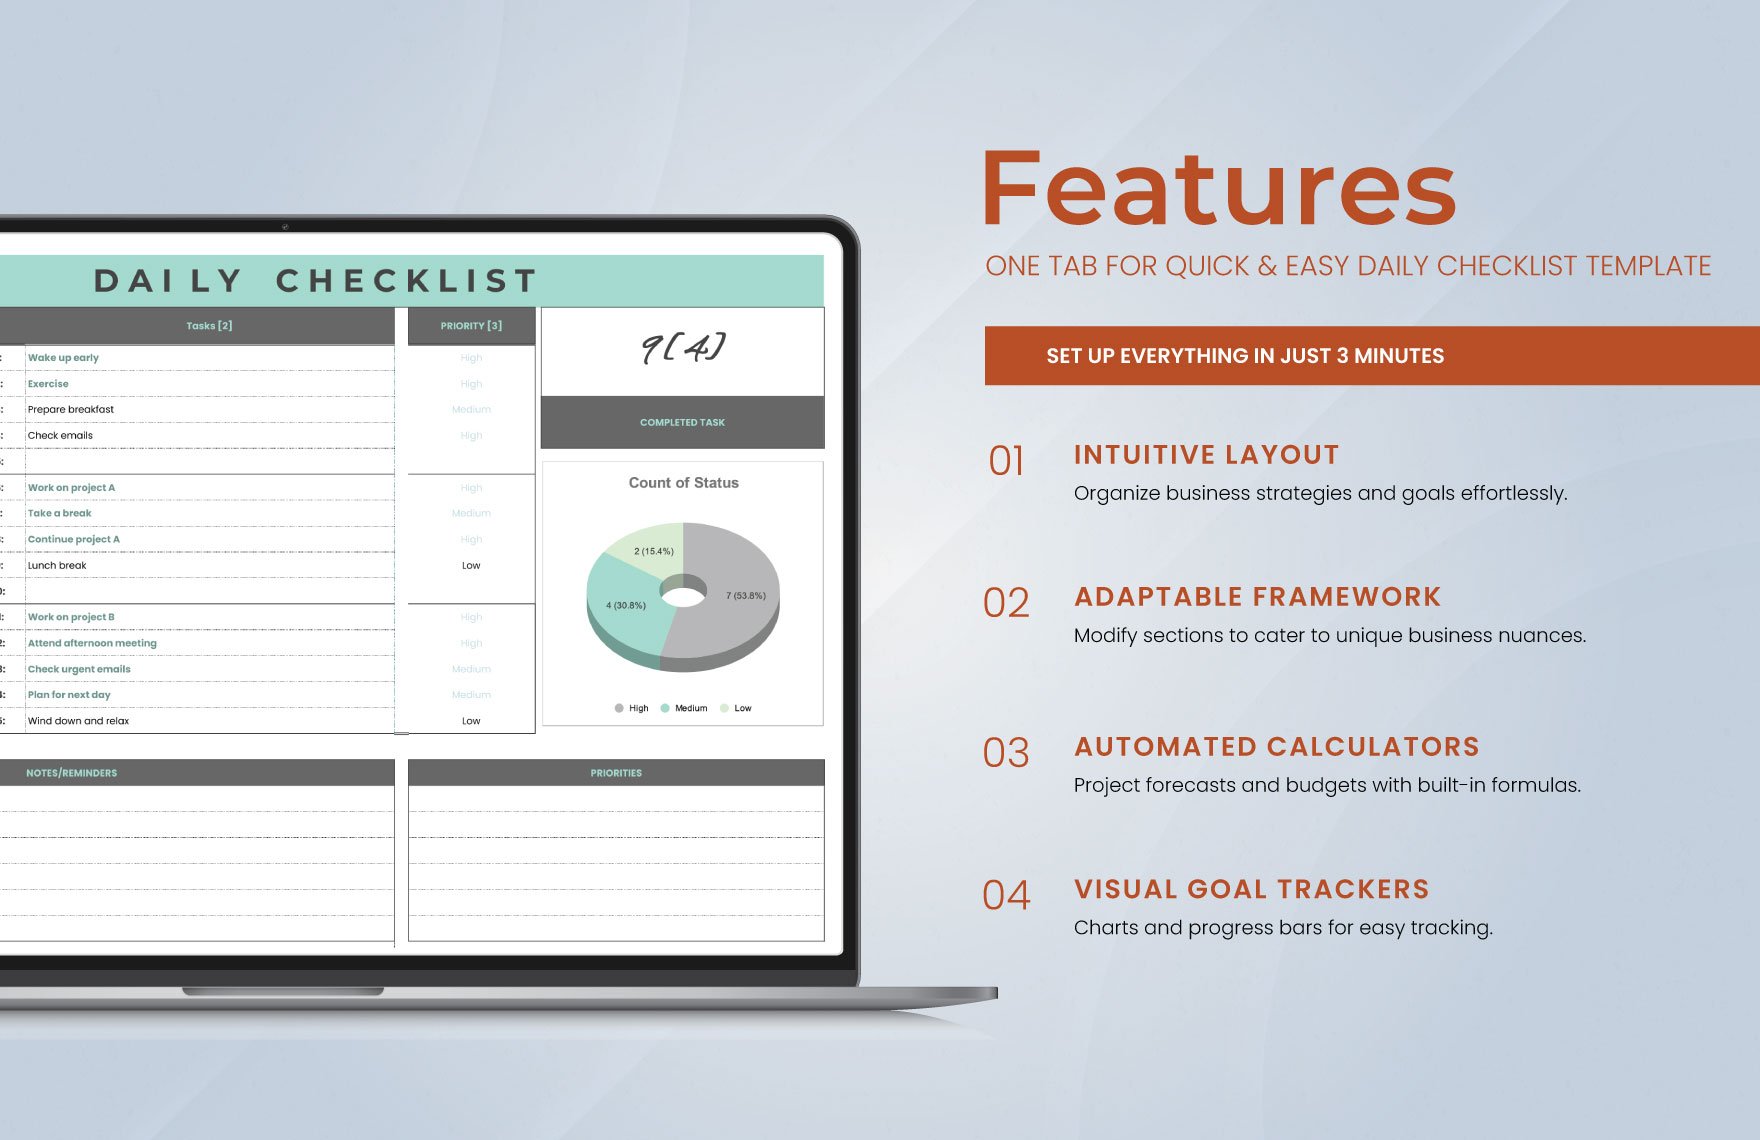 Daily Checklist Template